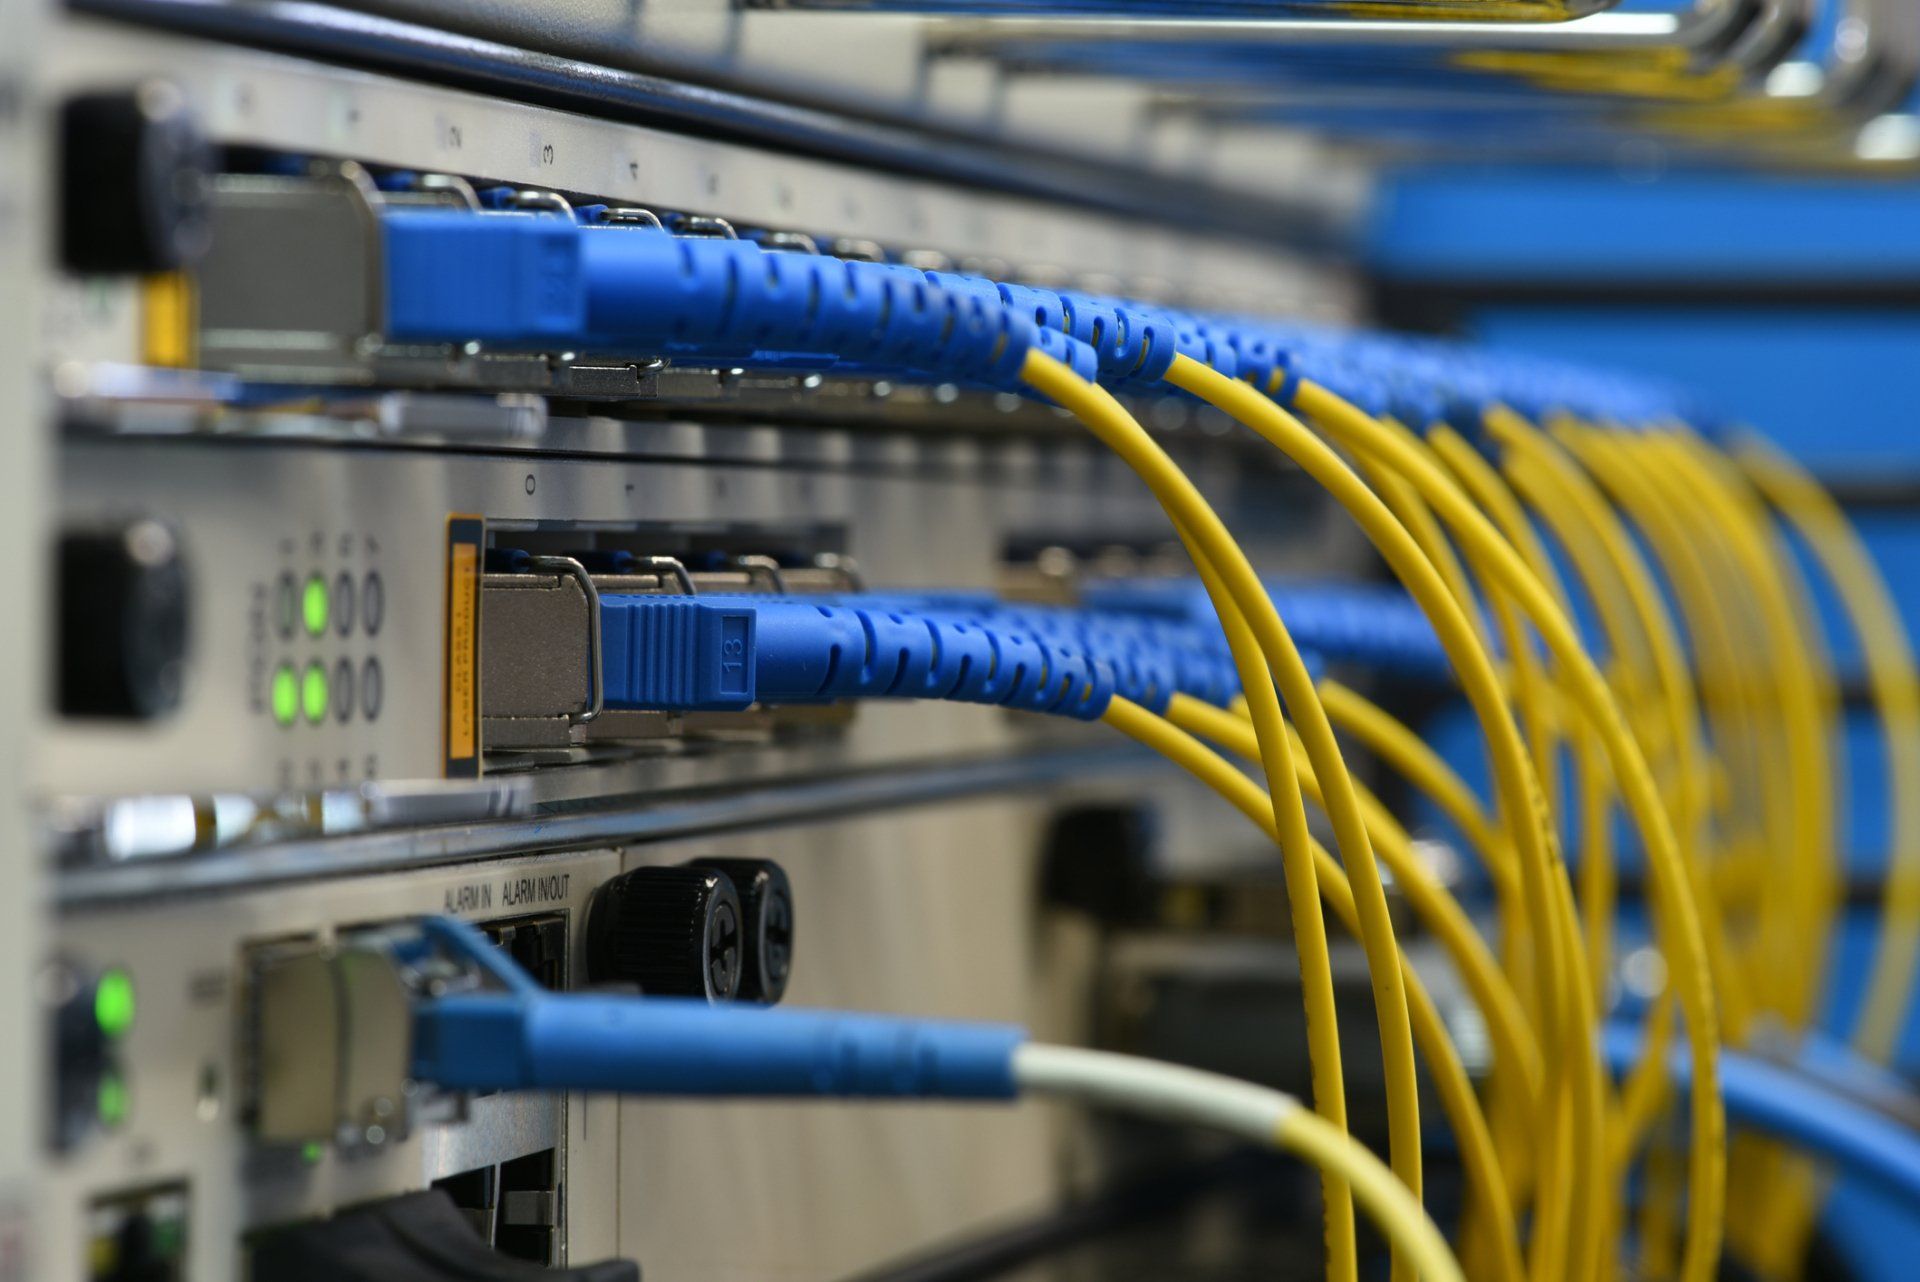 Cabling Services Baton Rouge, LA — Network Devices and Optical Cables in Baton Rouge, LA